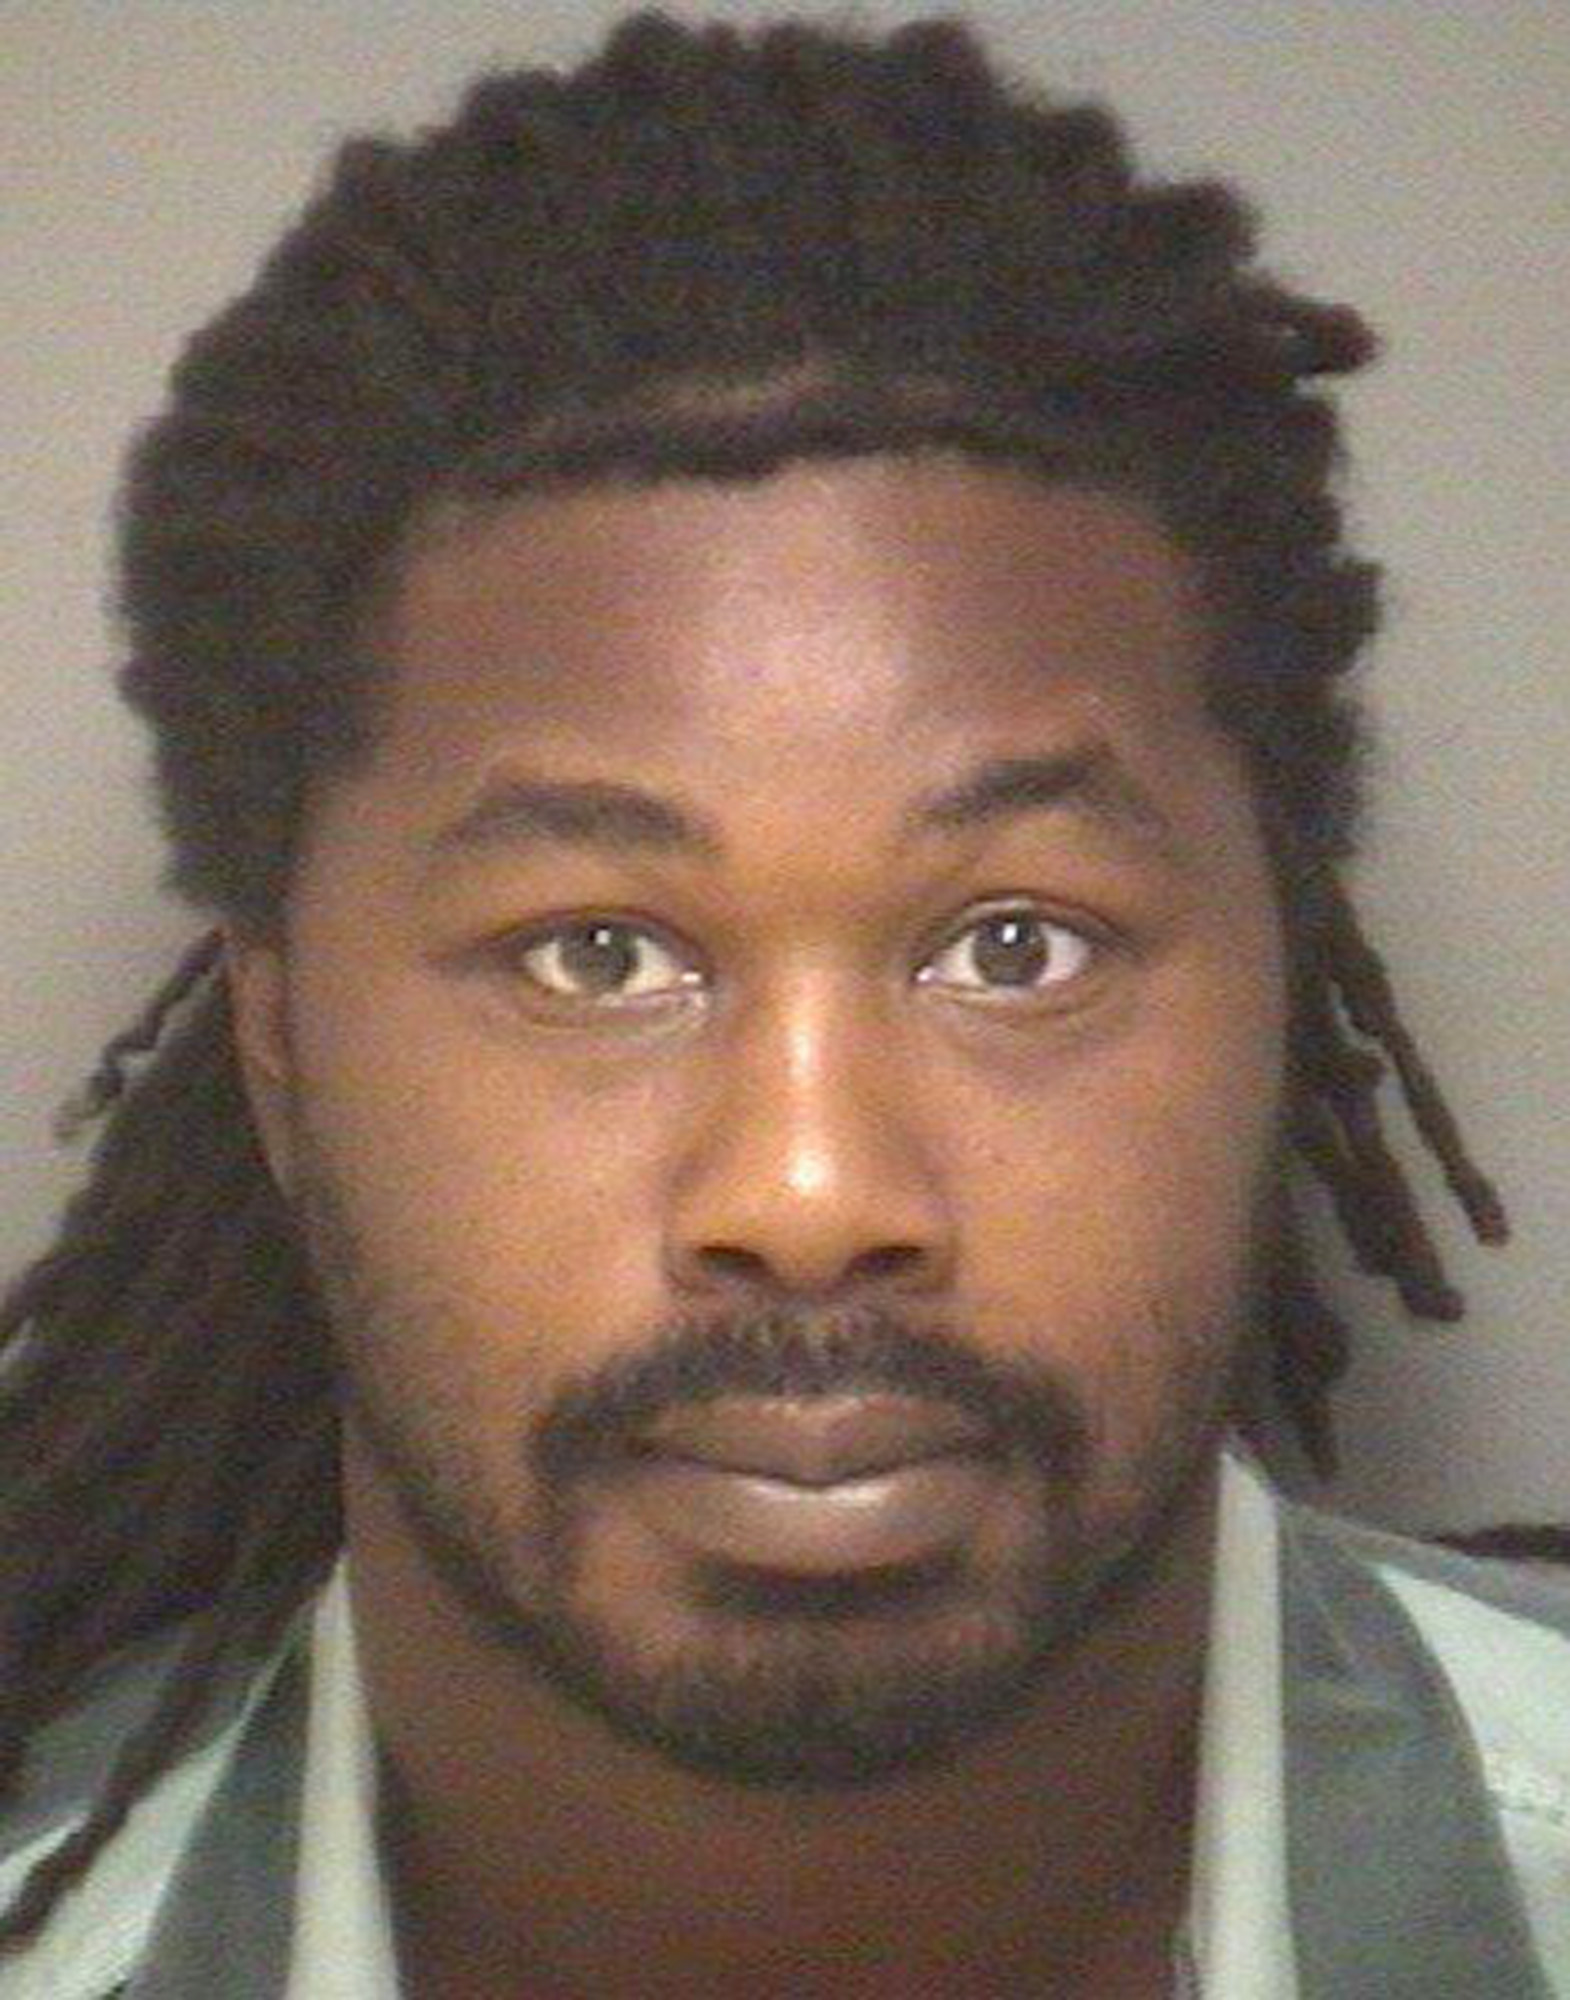 This undated photo provided by the City of Charlottesville, Va. on Friday, Sept. 26, 2014 shows Jesse Leroy Matthew Jr. Matthew, 32, is suspect in the Sept. 13, 2014 disappearance of University of Virginia student Hannah Graham. 